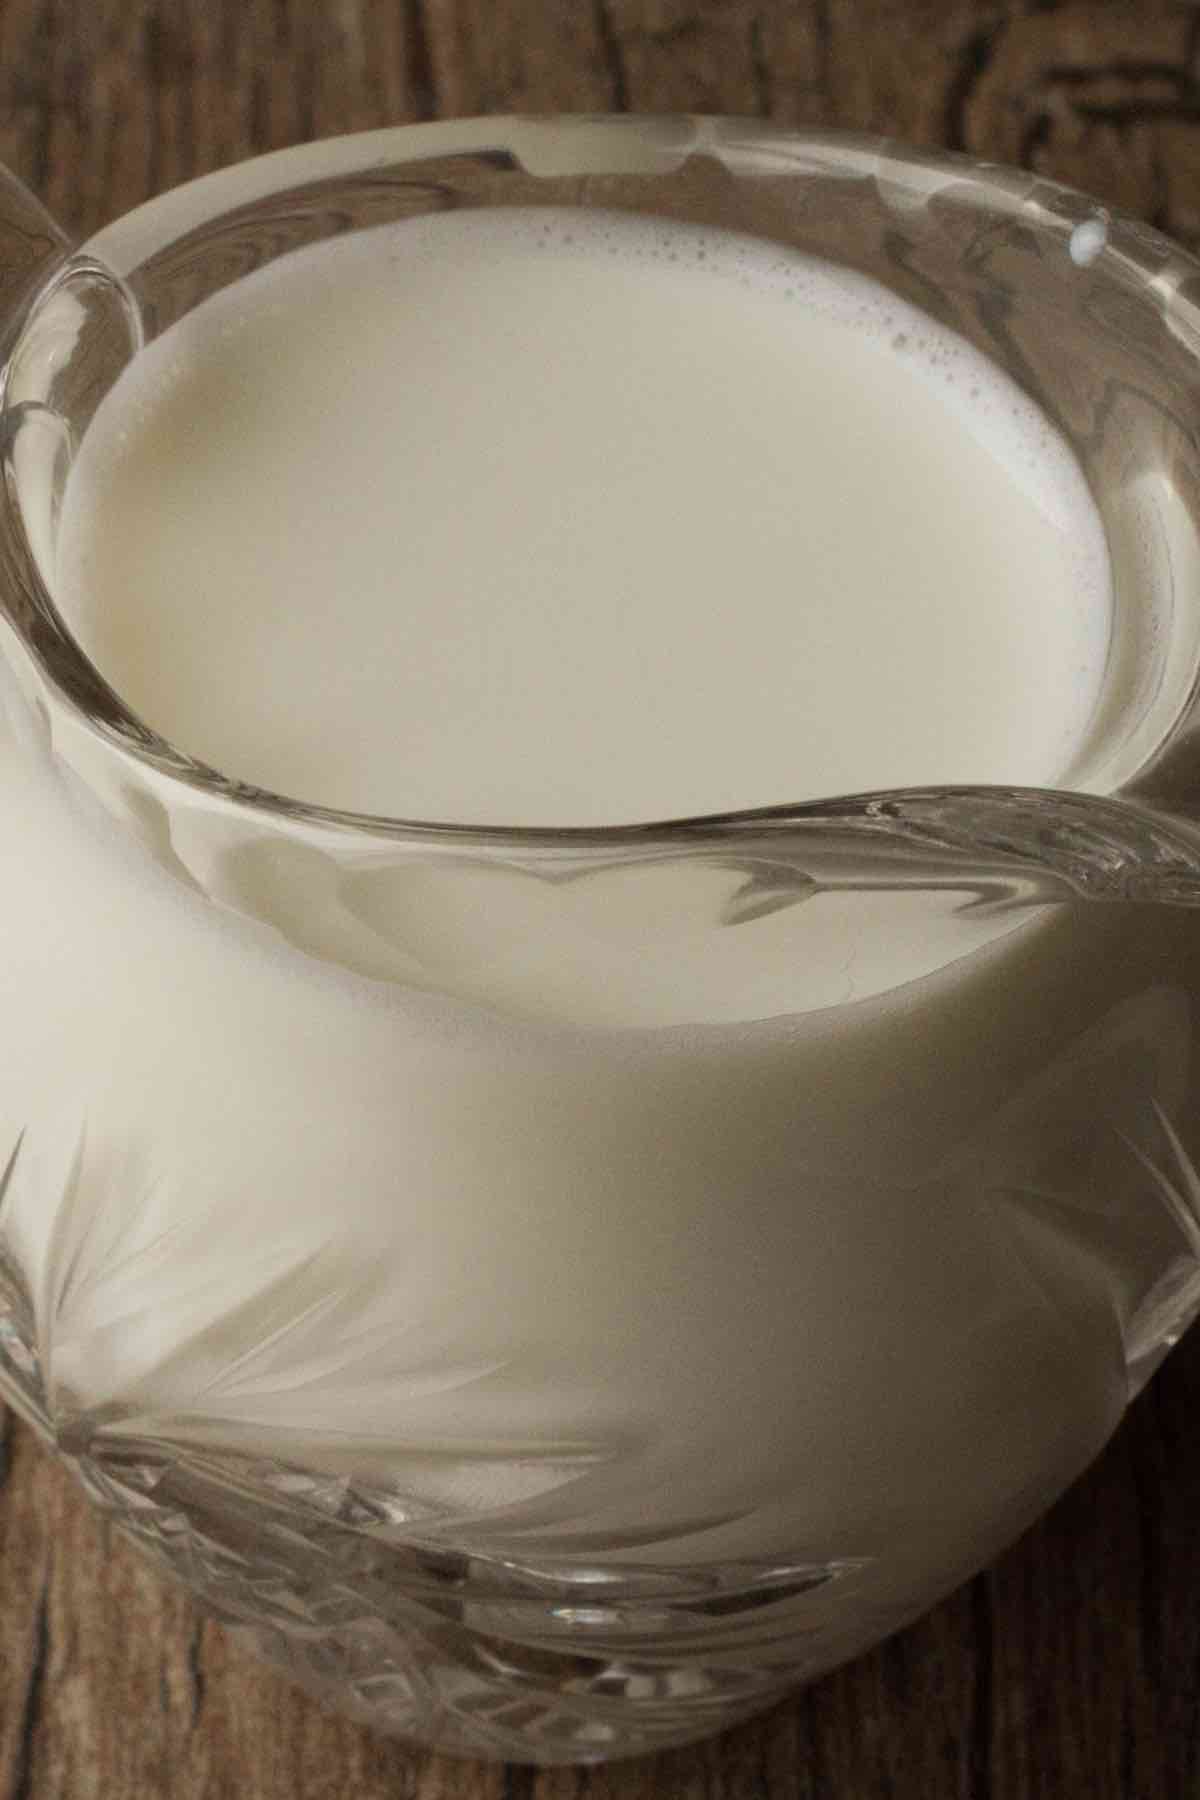 Many recipes call for heavy whipping cream. This staple ingredient is used in everything from desserts to soups to sauces. Don’t worry if you don’t have any on hand and can’t run out to the store. With 3 simple ingredients, you can make your very own heavy whipping cream at home easily.